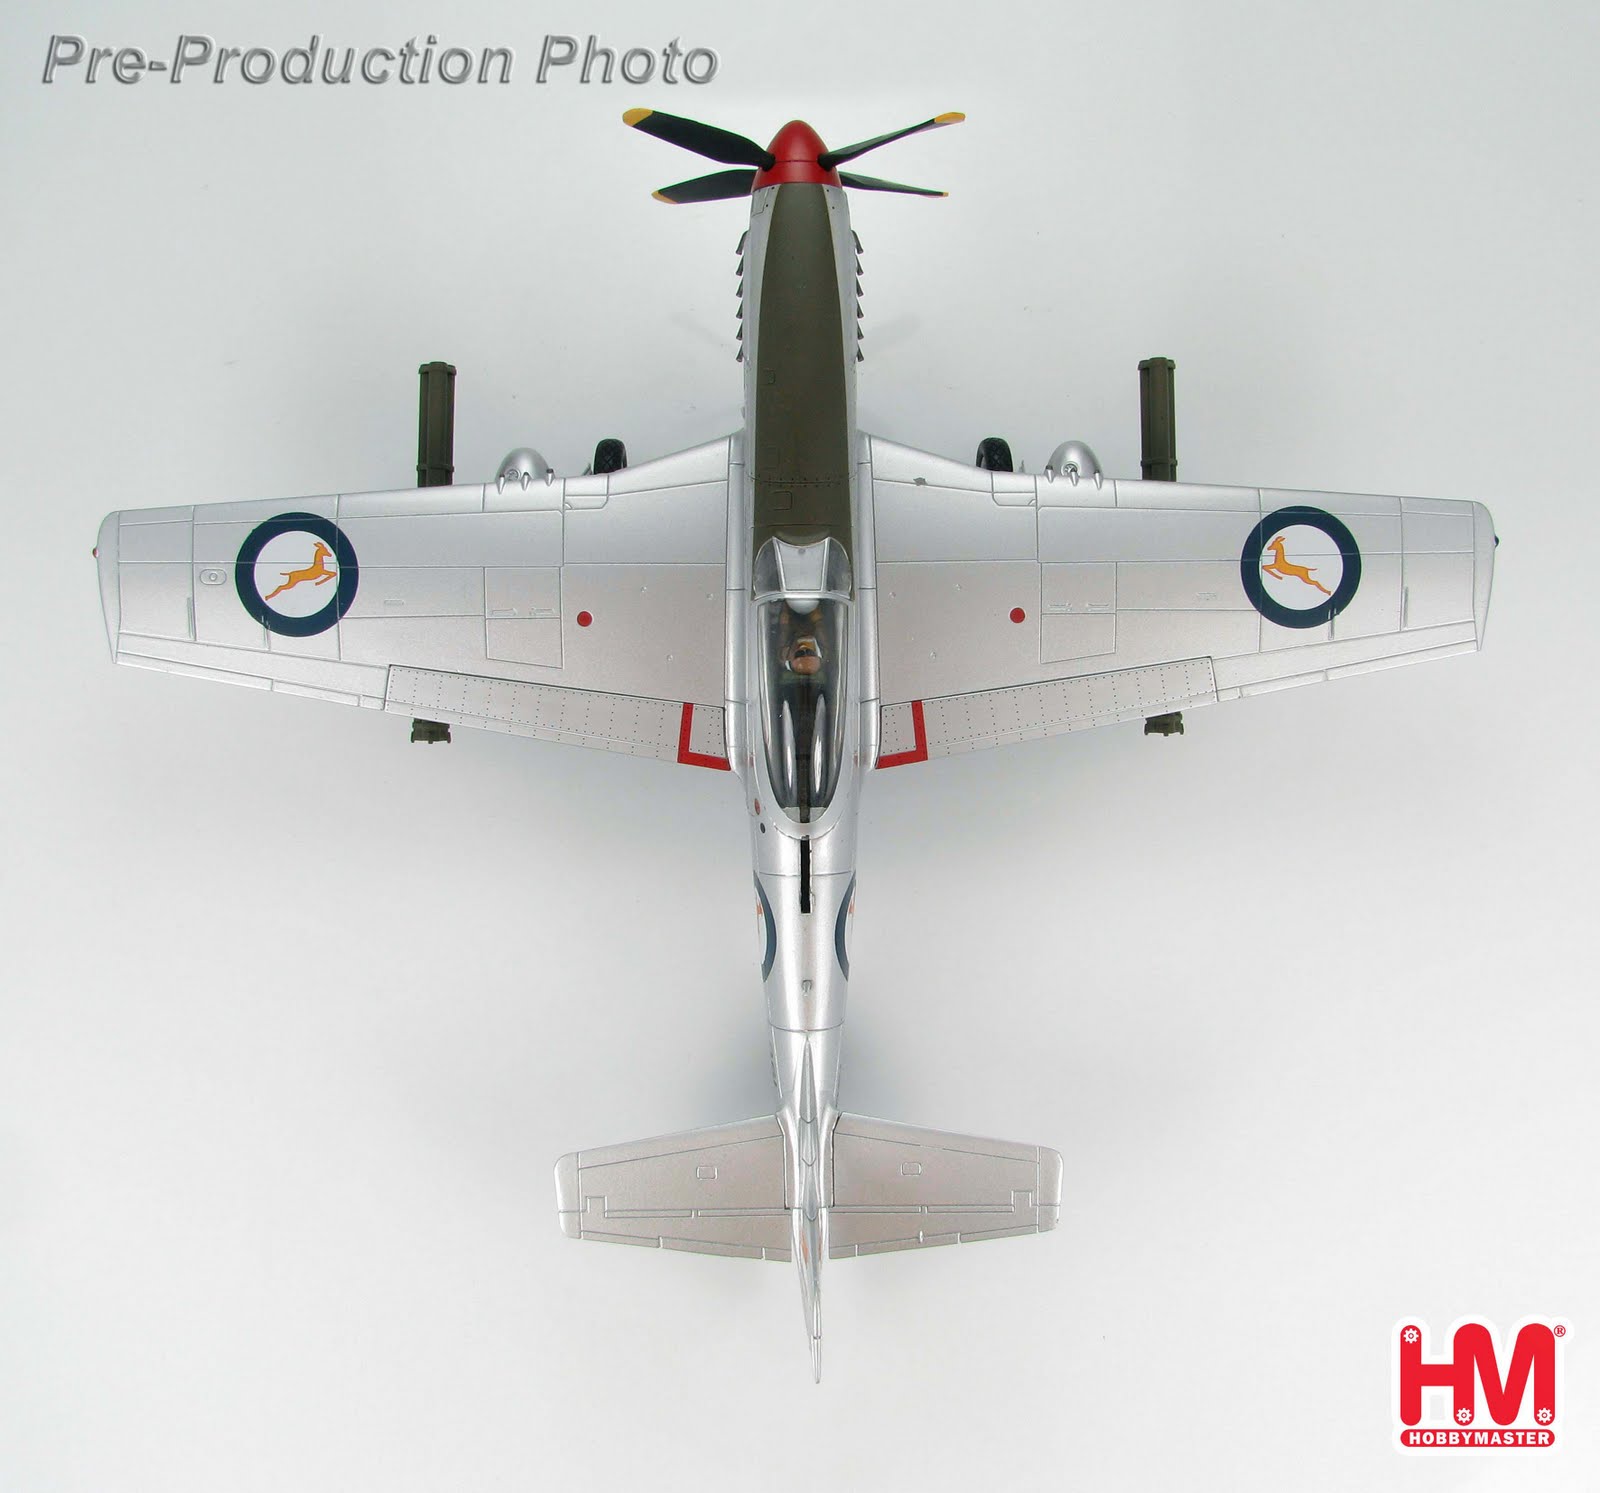 Hobby Master HA7706 F-51D Mustang 2nd Squadron, South African Air Force, Korea 1952, 